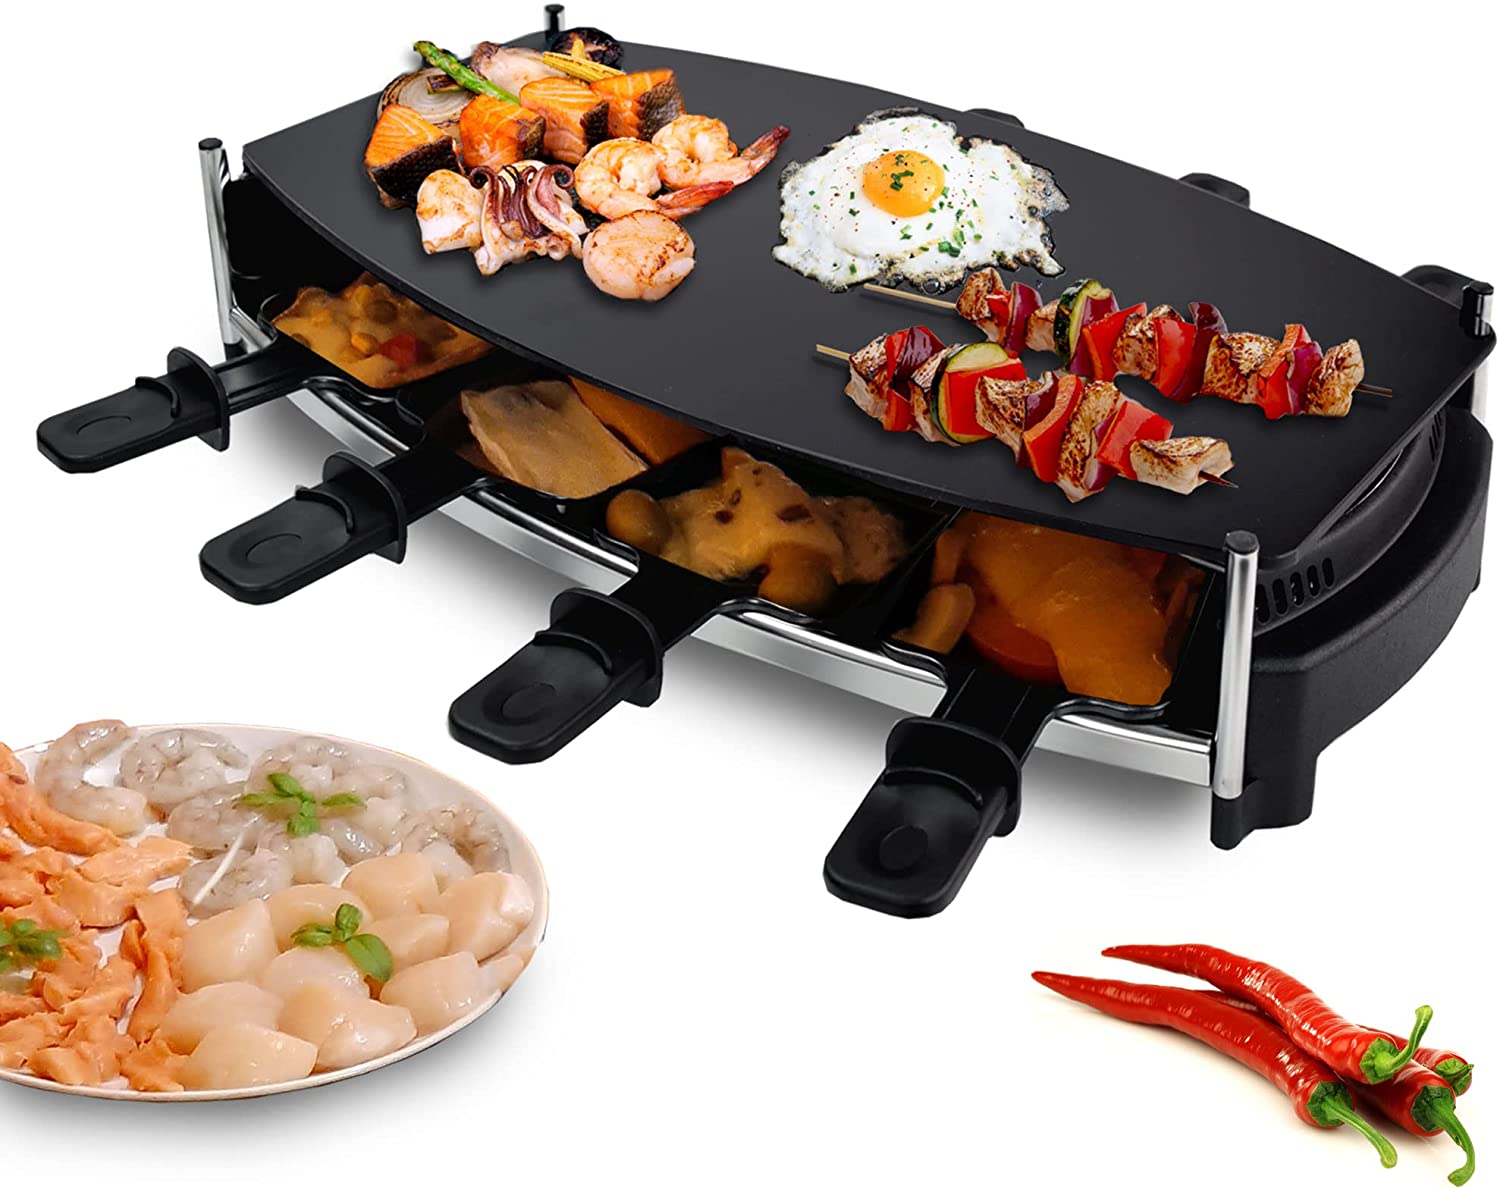 Syntrox Germany Raclette RAC-1000W-Wallis with Glass Ceramic Grill Plate for 8 People